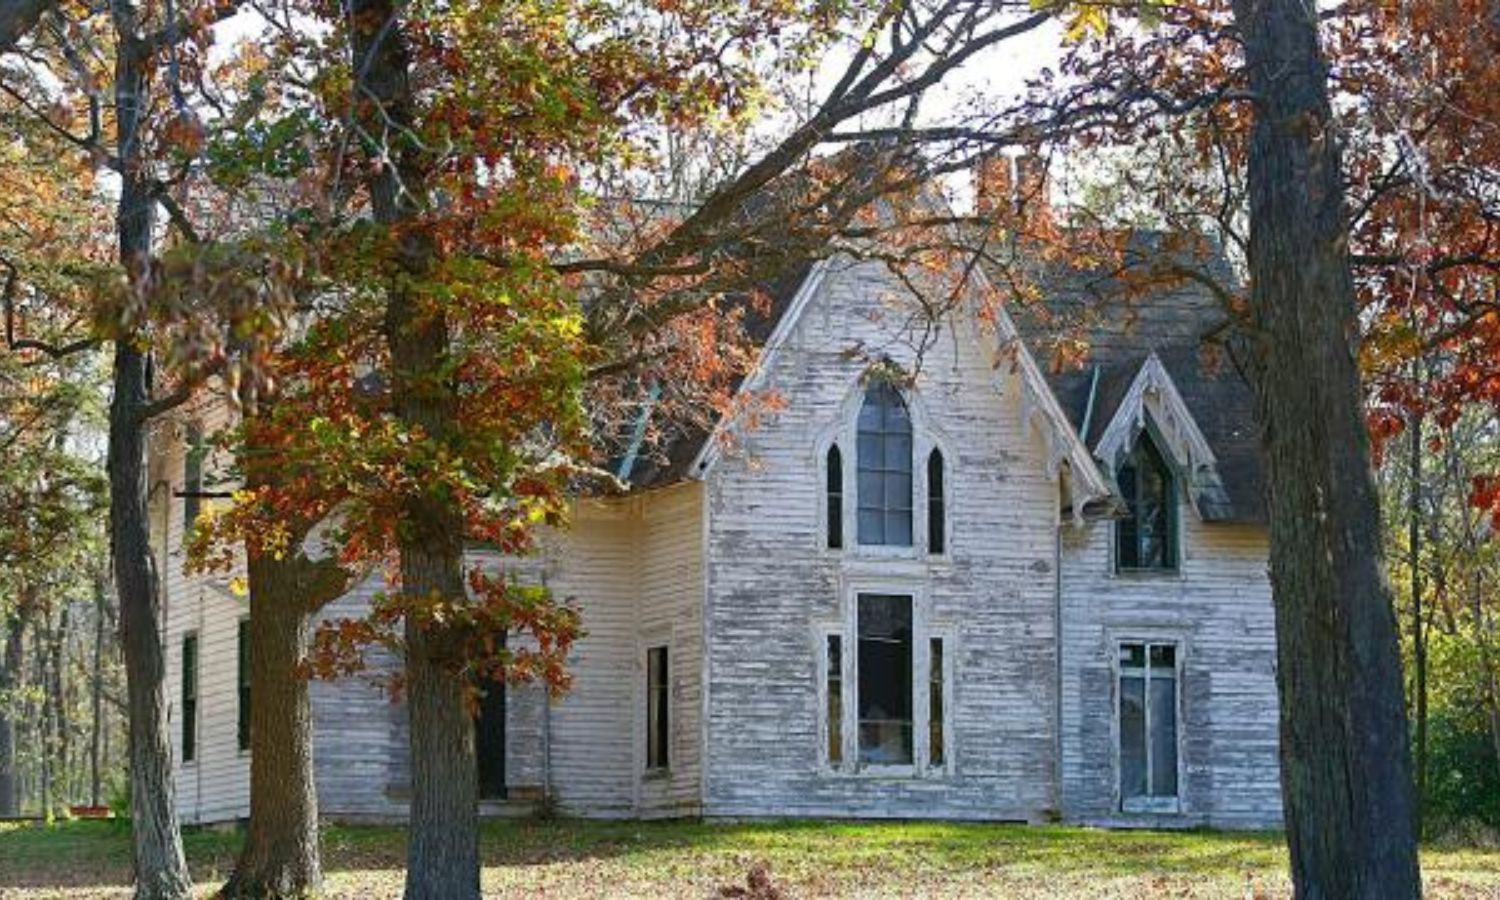 This Place in Wisconsin Is Known as One of the Scariest Places in America